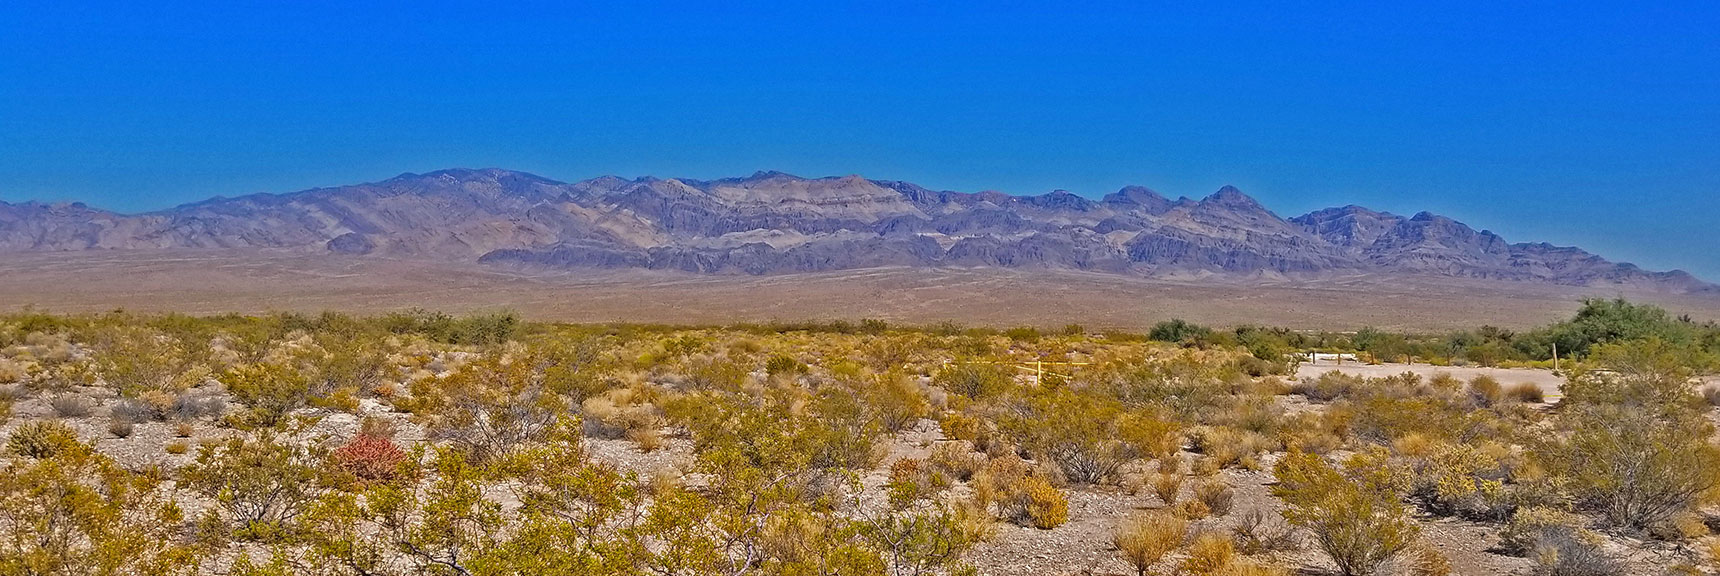 The Sheep Range is the Main Feature Here | Visitor Center | Desert National Wildlife Refuge, Nevada